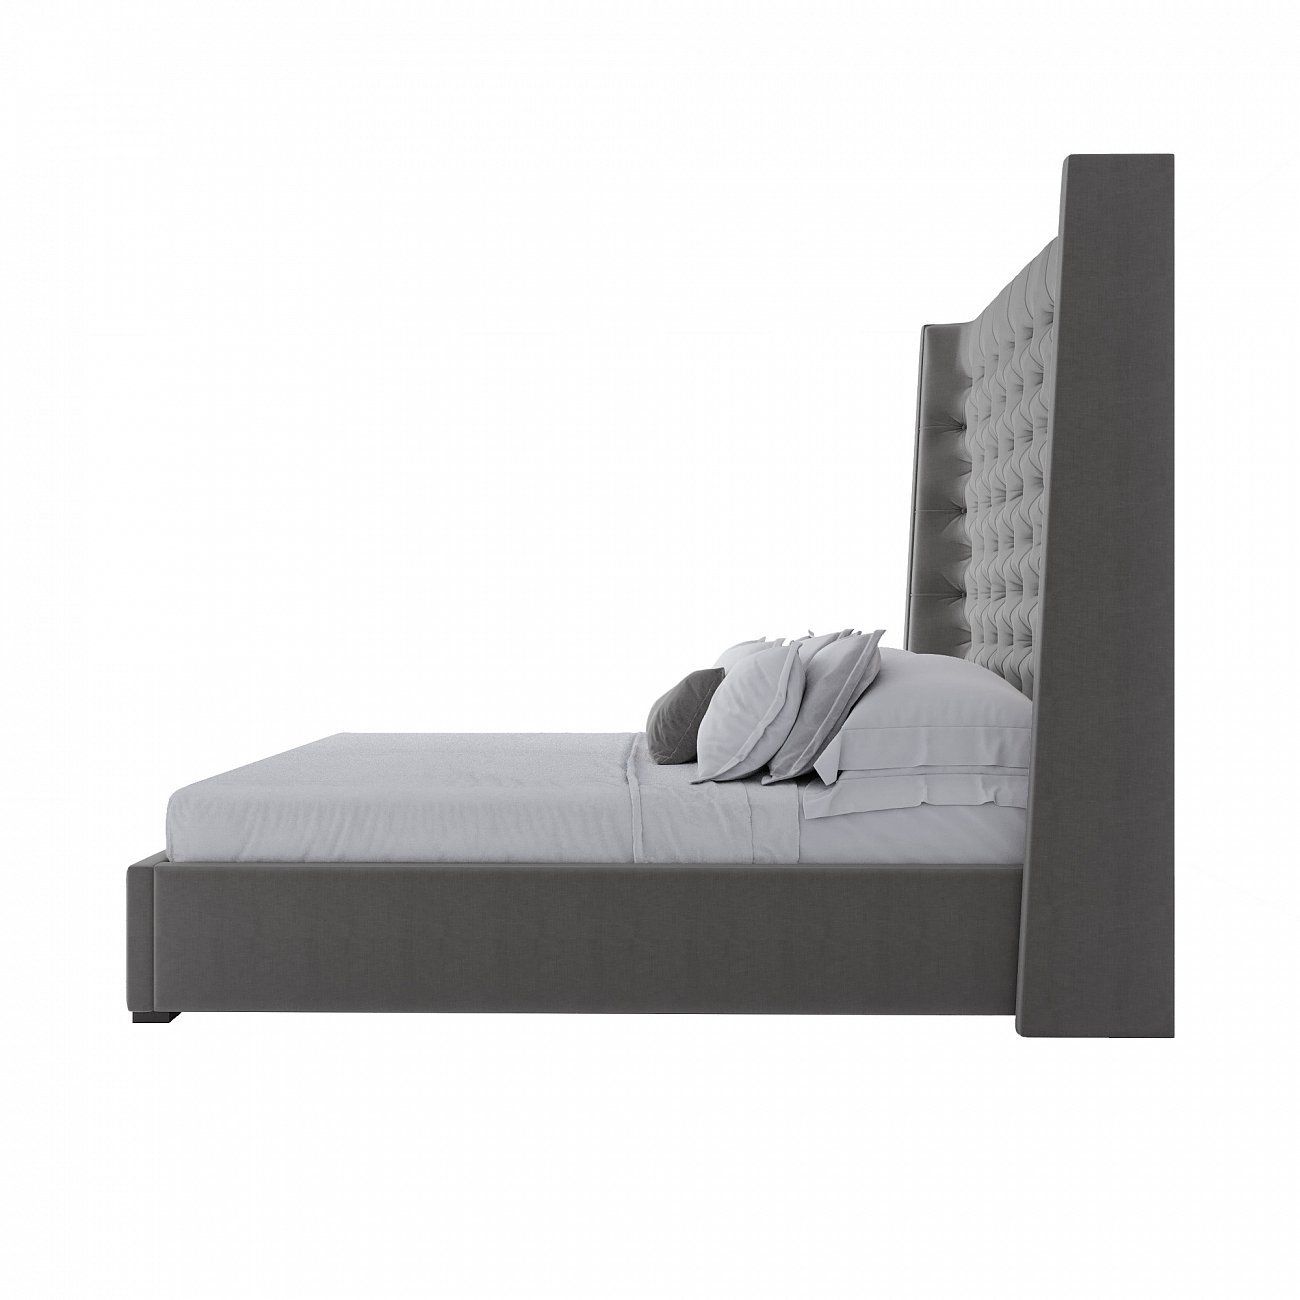 Double bed 160x200 grey velour Jackie King